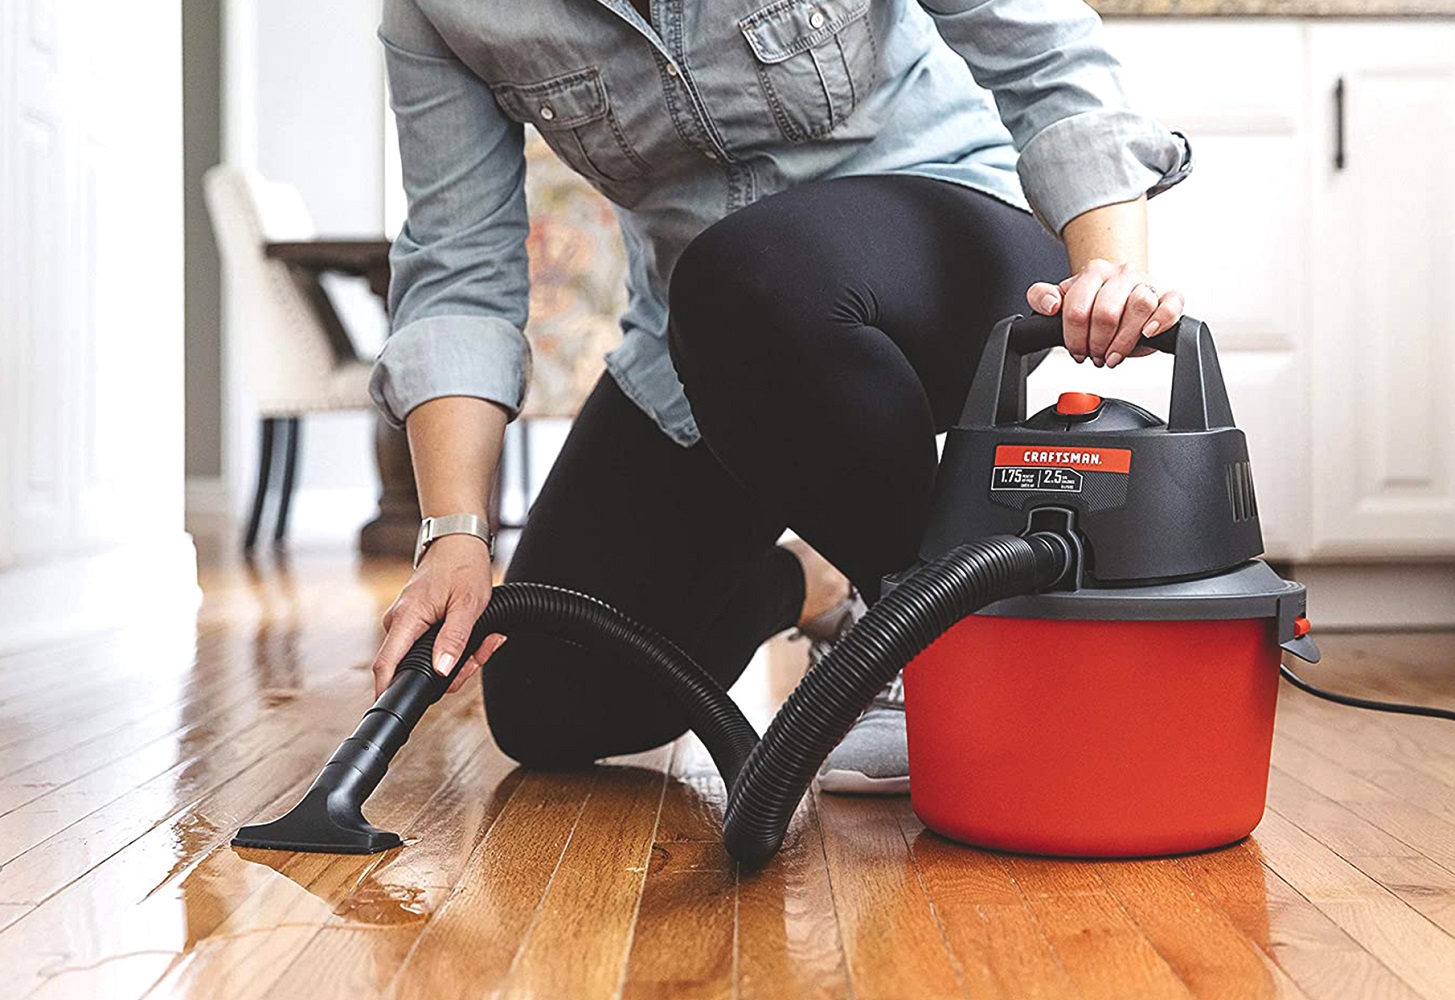 4 Best Wet/Dry Vacuums for December 2022